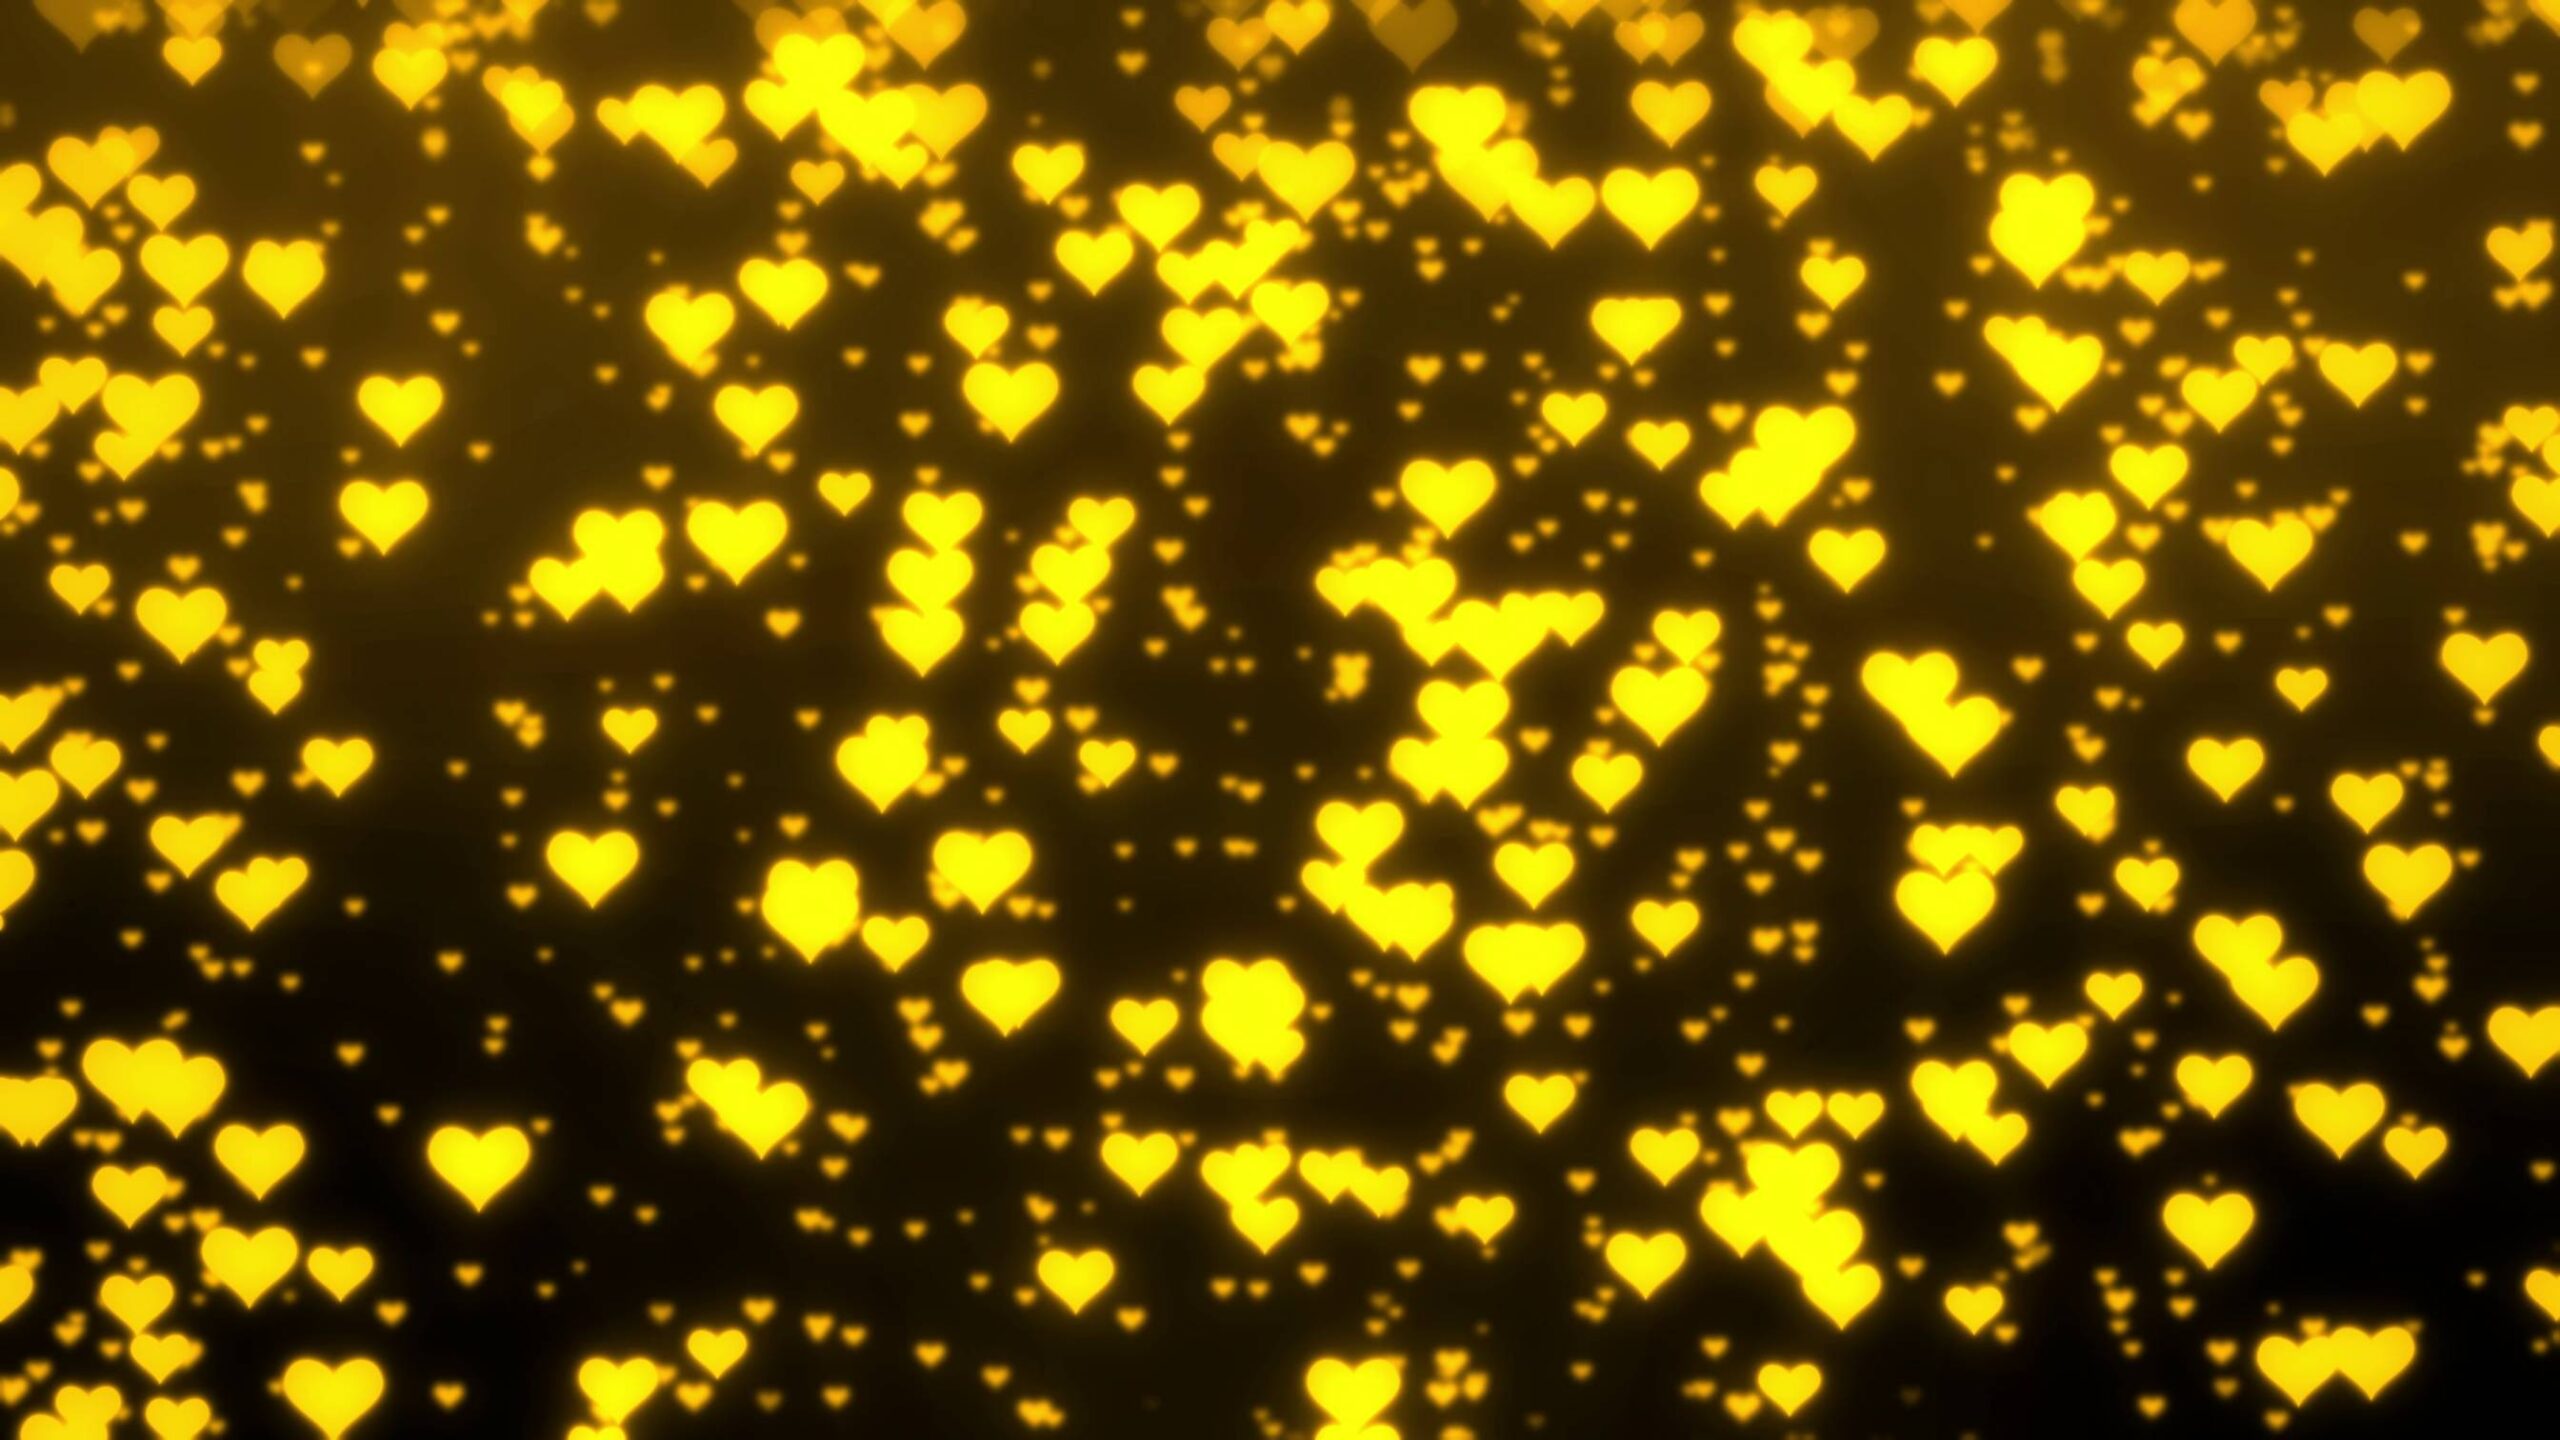 4K Beautiful Yellow Hearts Motion Background || FREE DOWNLOAD || Valentine’s Day Screensaver